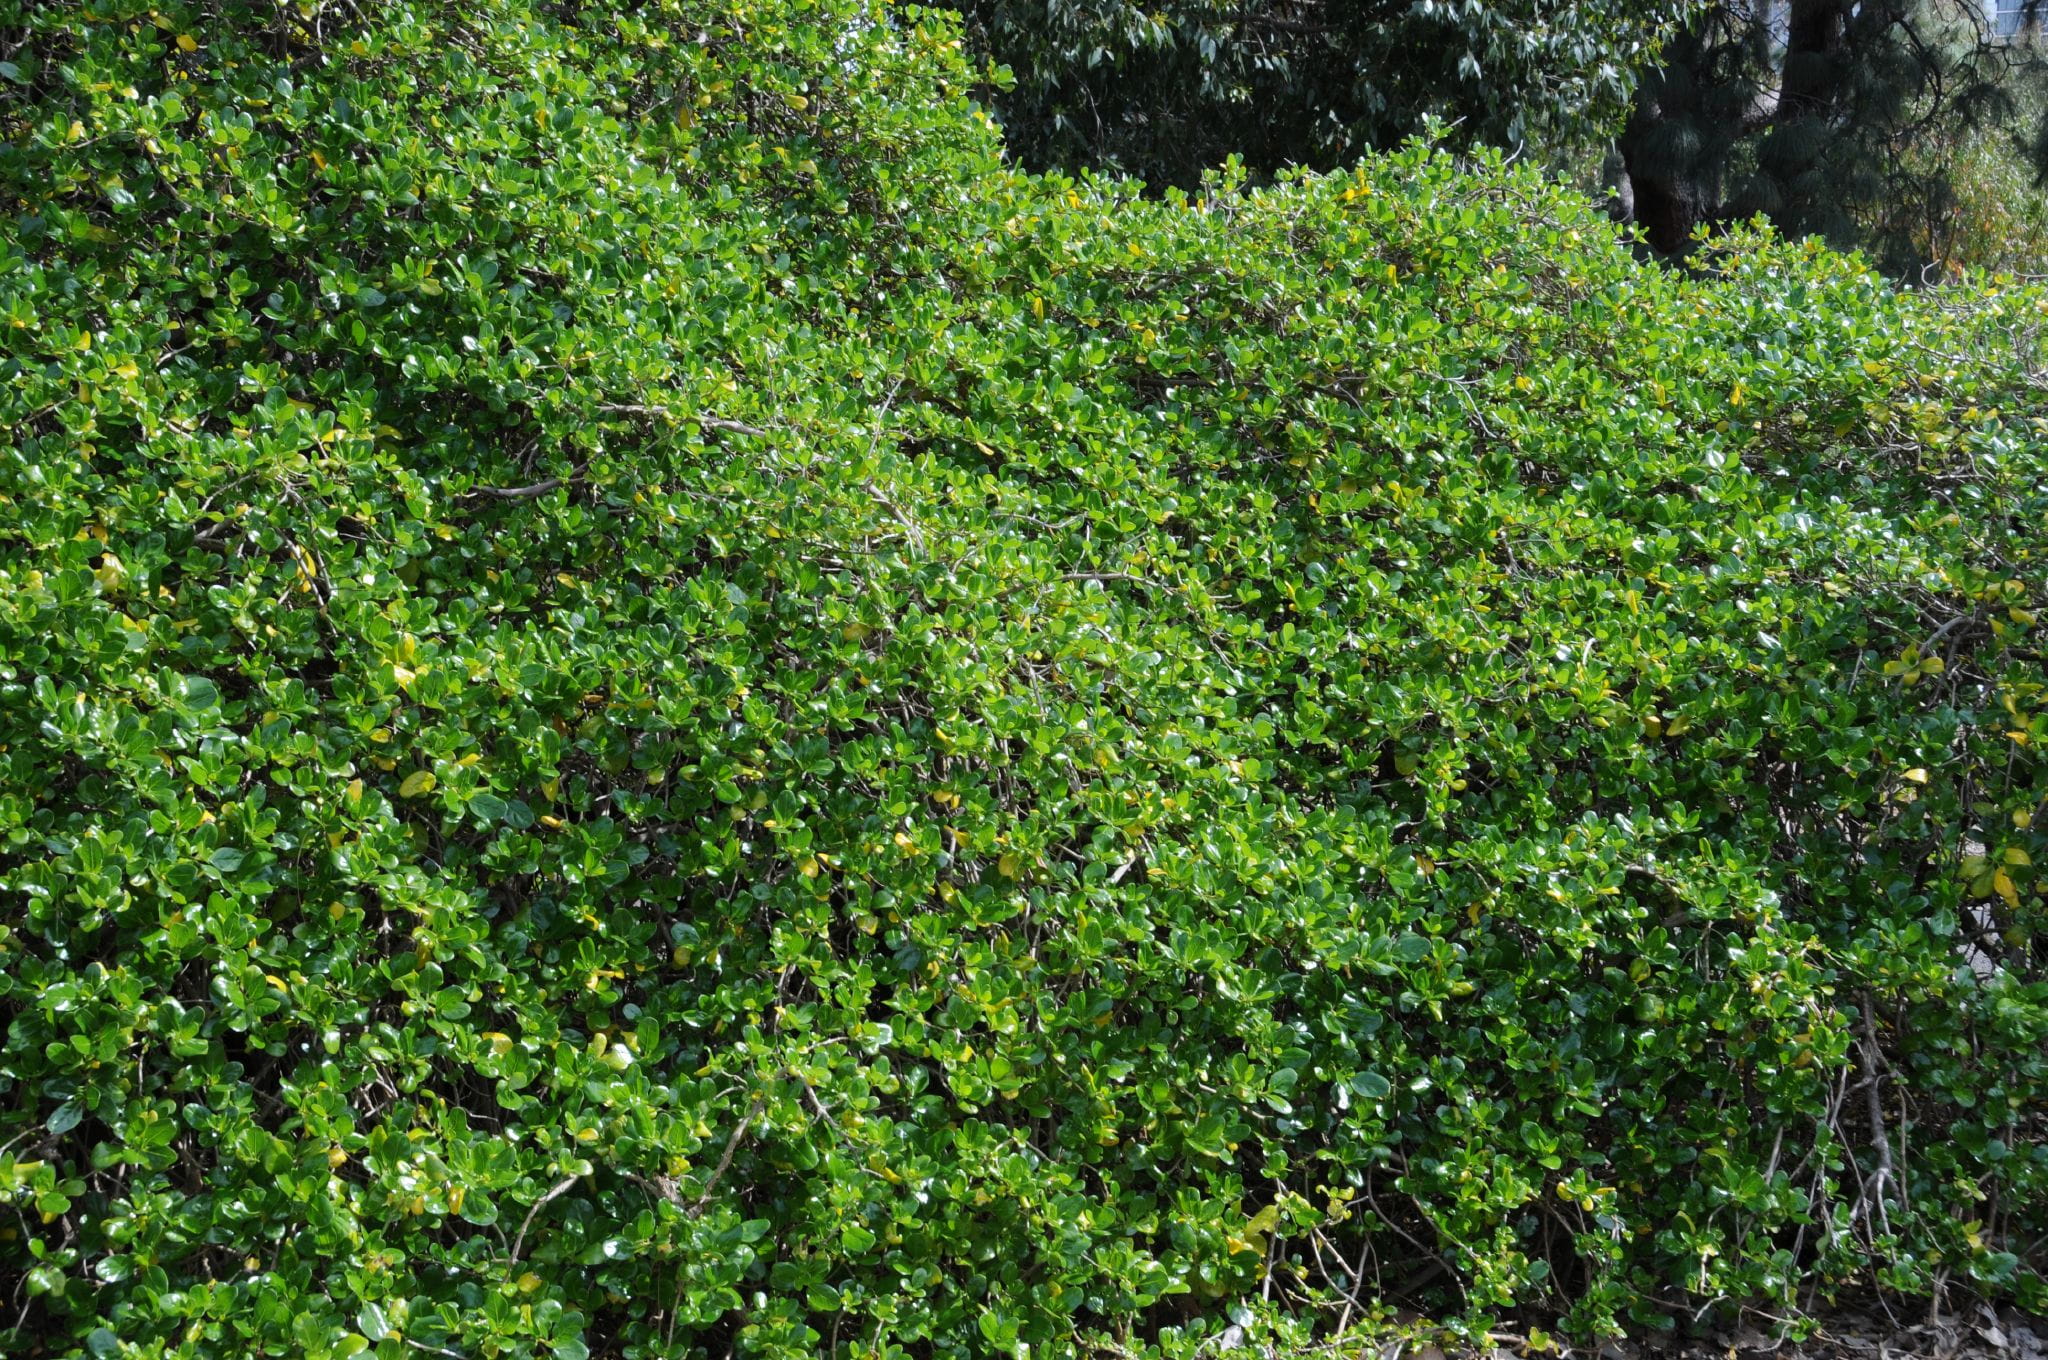 A dense mat of green vegetation is smorthering other plants